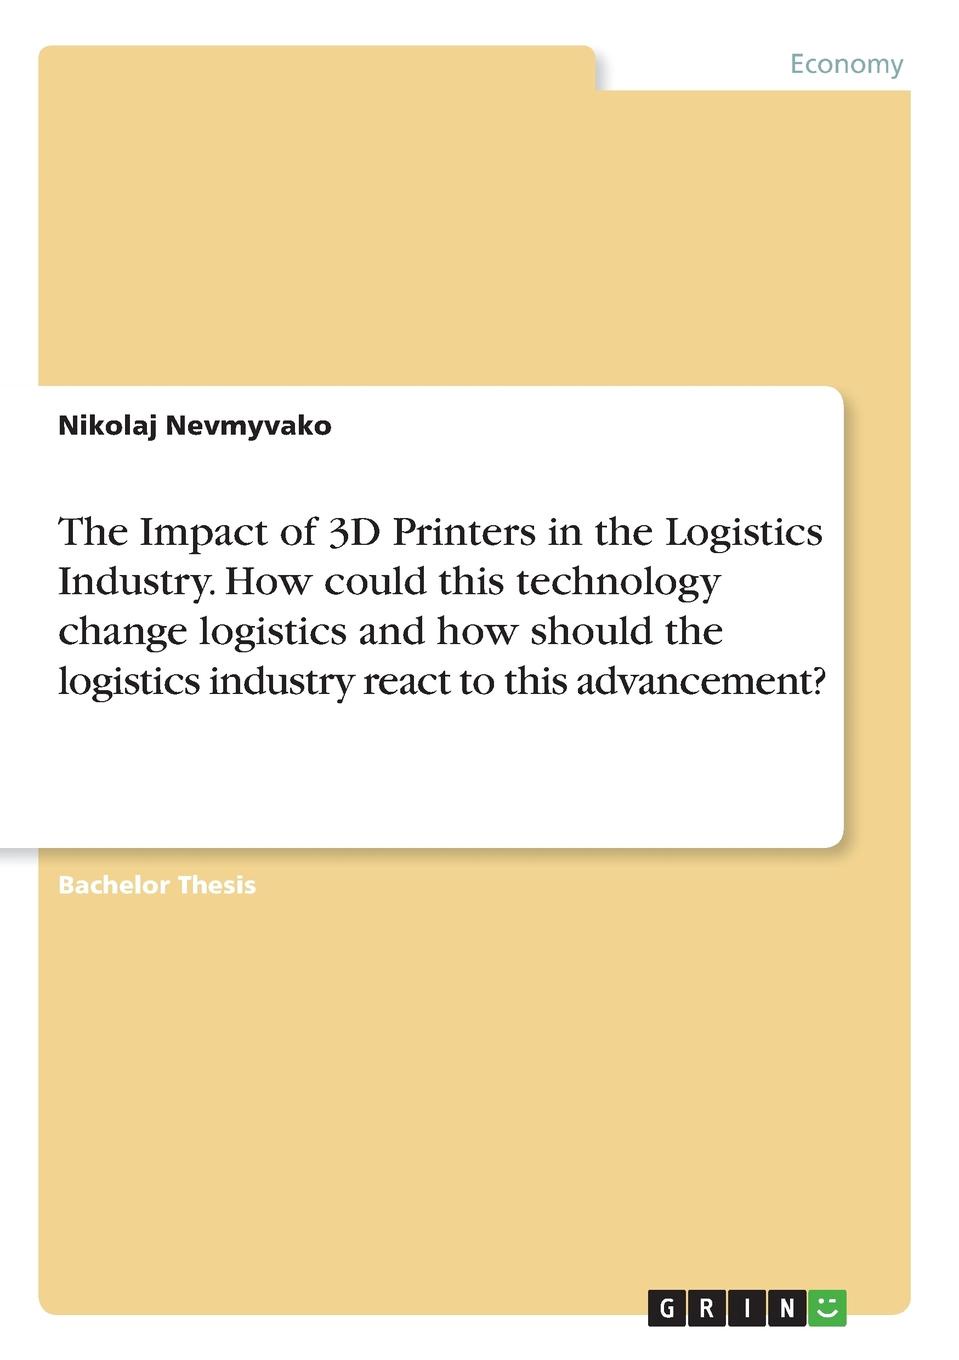 фото The Impact of 3D Printers in the Logistics Industry. How could this technology change logistics and how should the logistics industry react to this advancement.